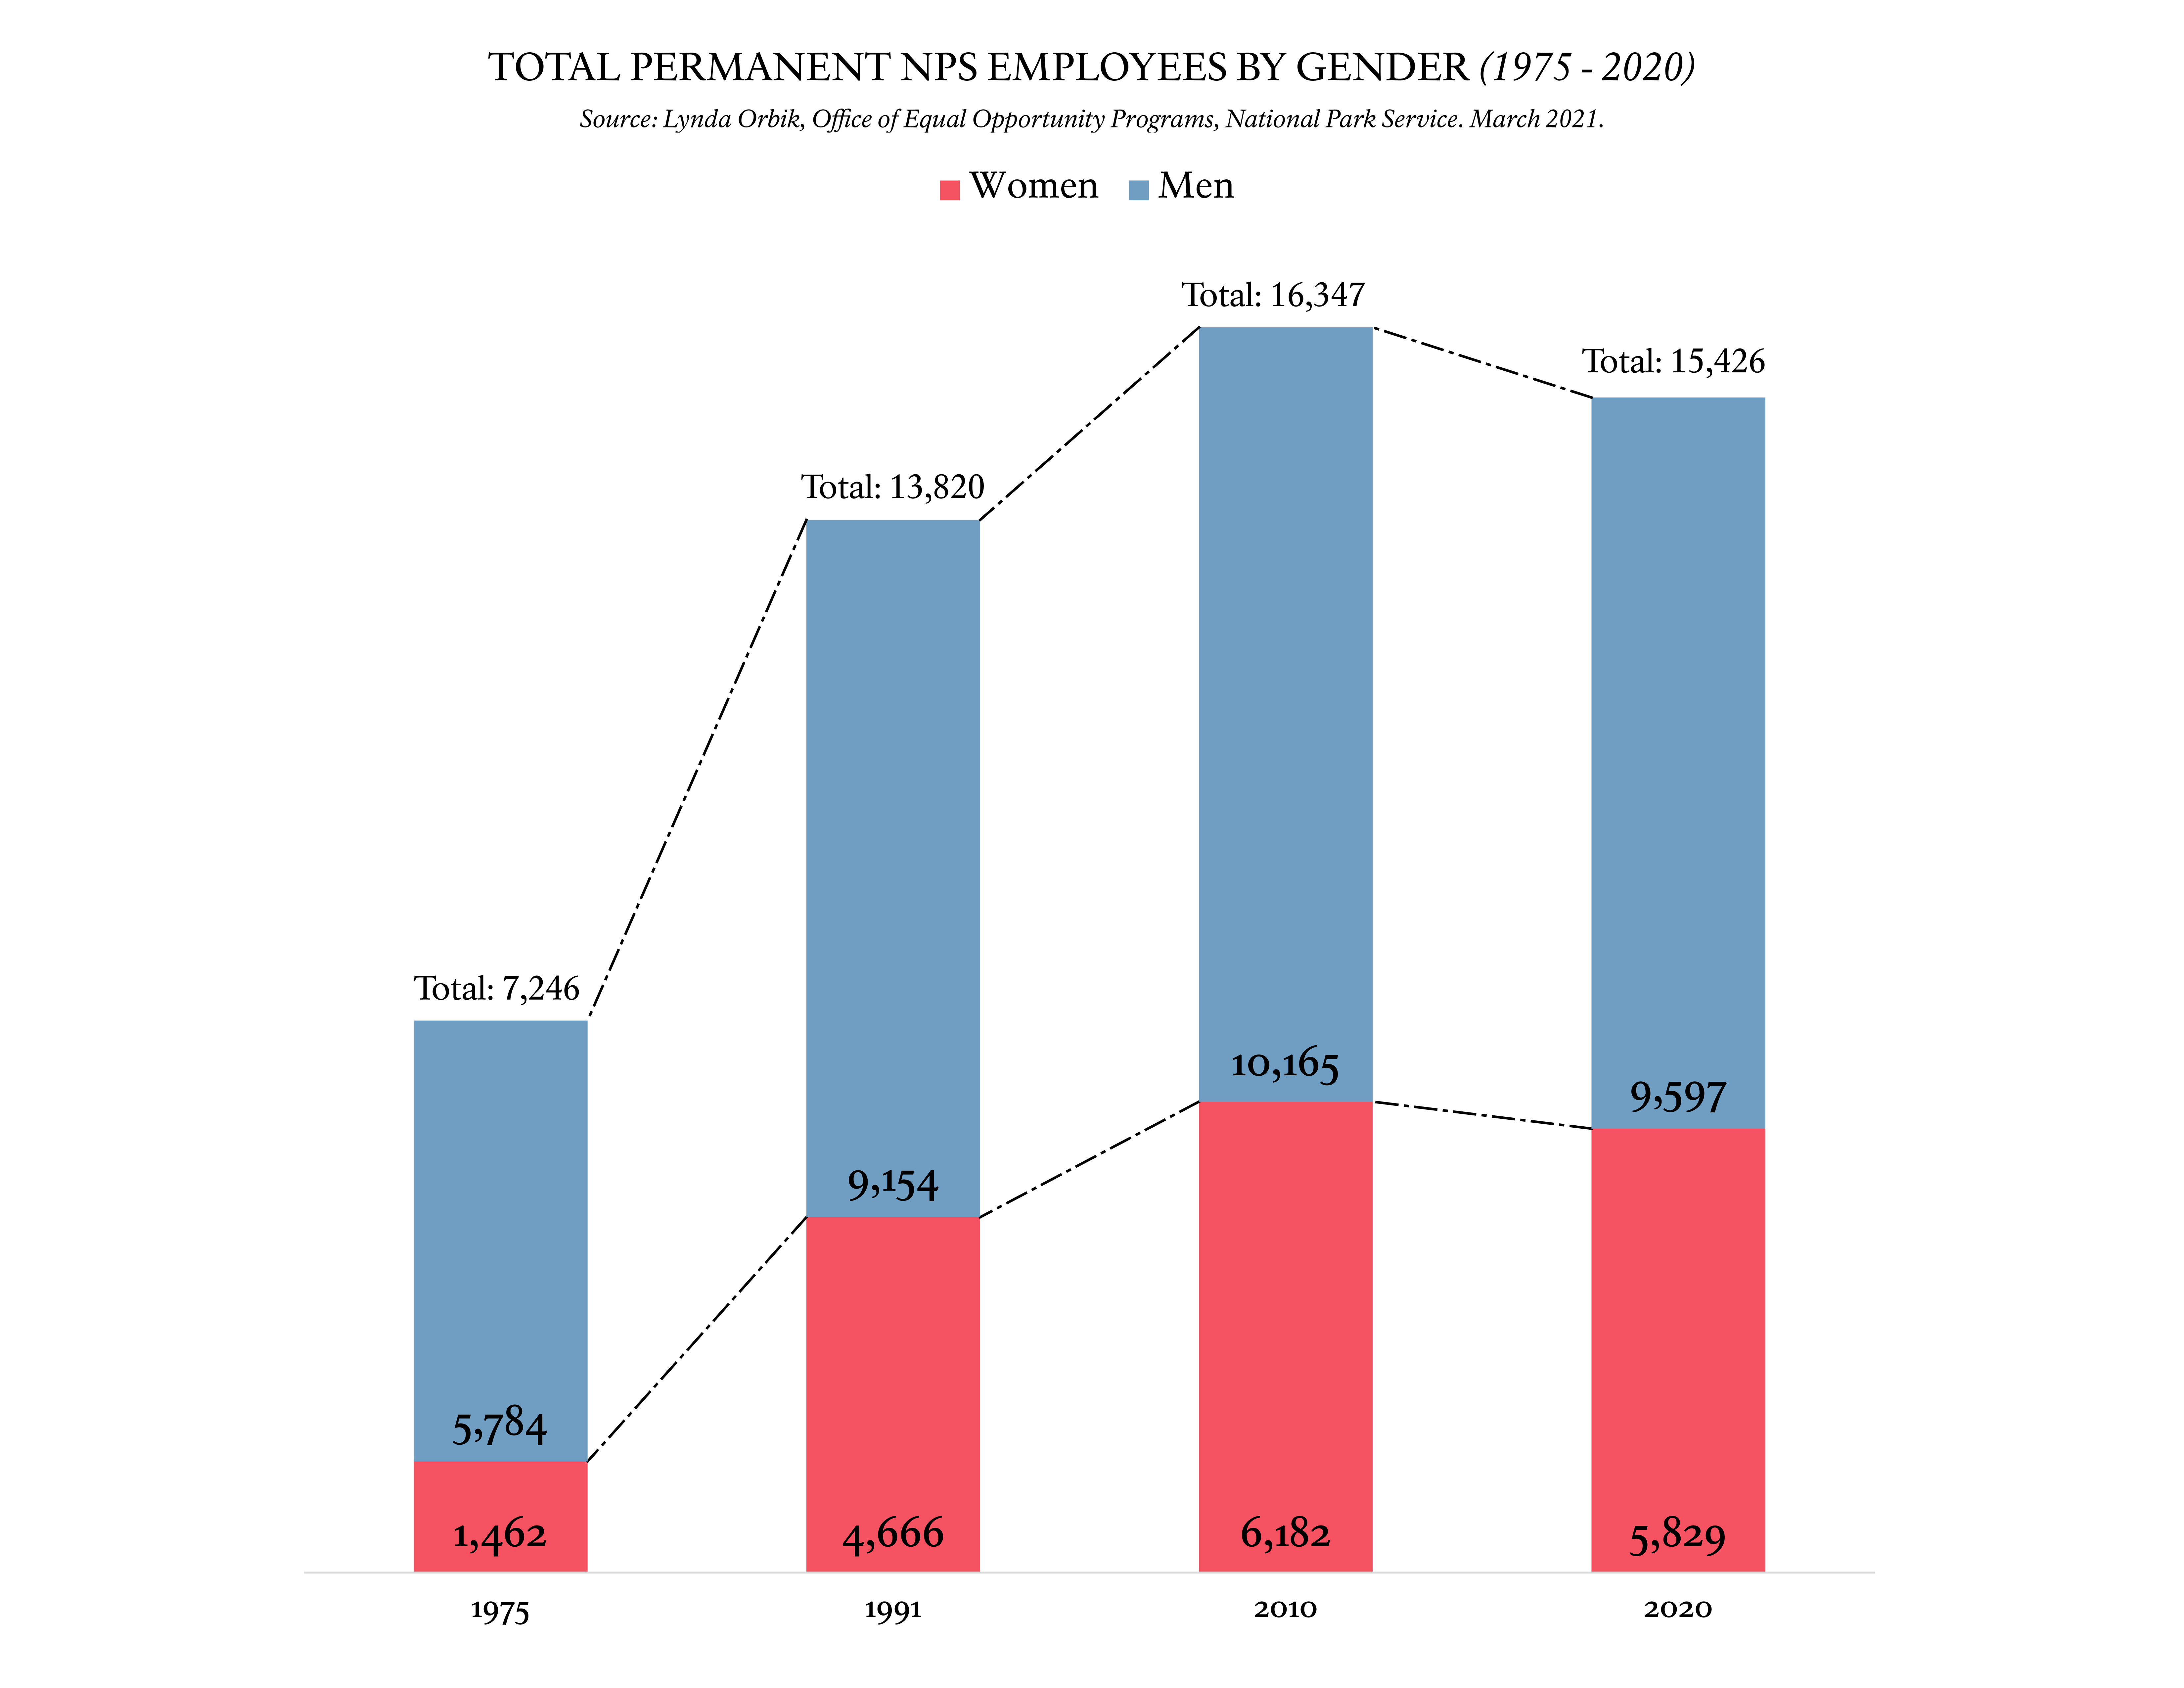 Bar chart comparing the number of women employees to men employees with permanent positions in the NPS  (1975-2020).